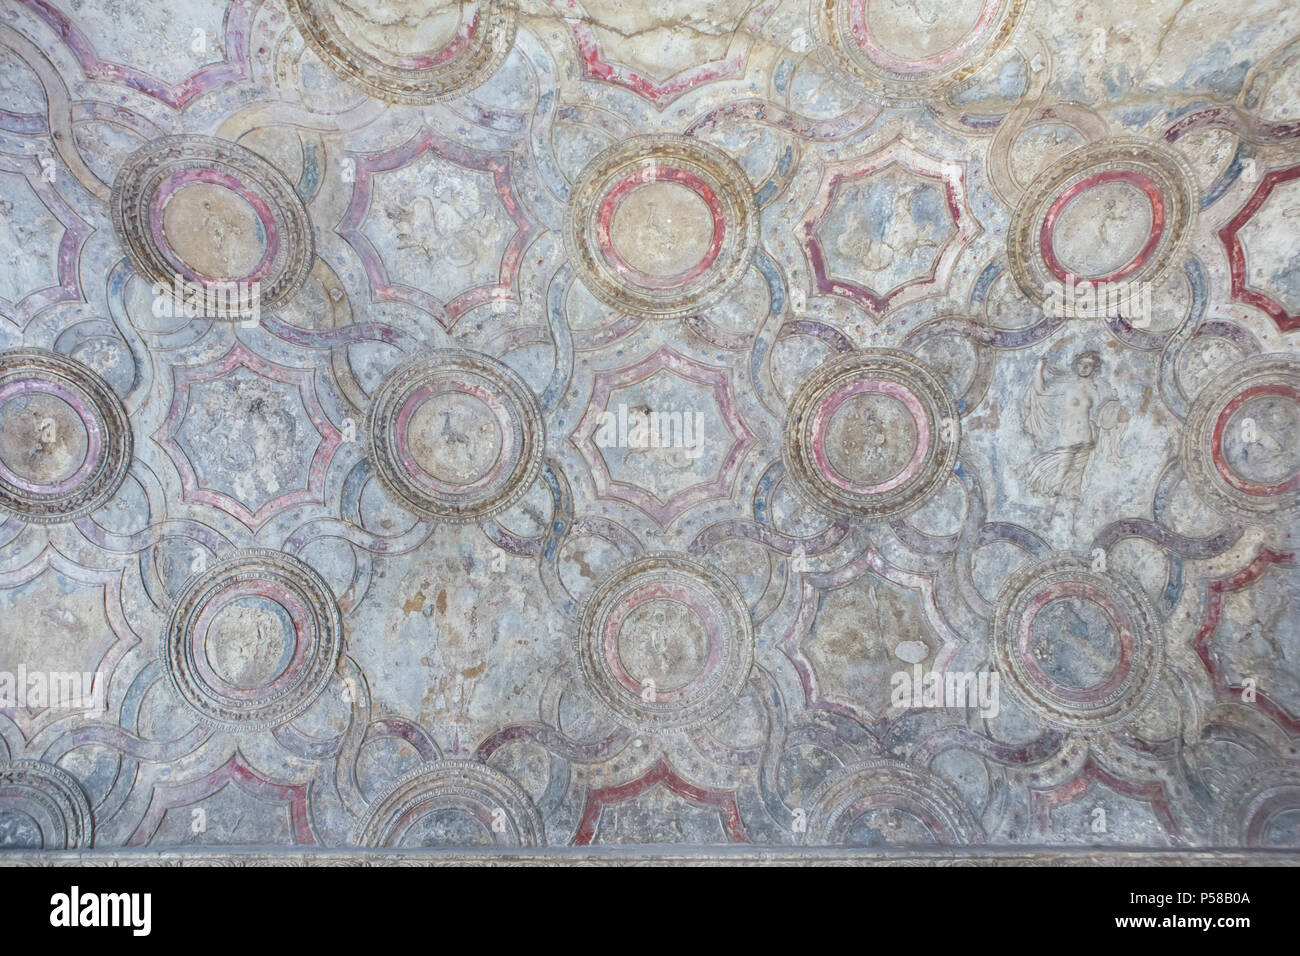 Ceiling stucco decoration in the Stabian Baths (Terme Stabiane) in the archaeological site of Pompeii (Pompei) near Naples, Campania, Italy. Stock Photo